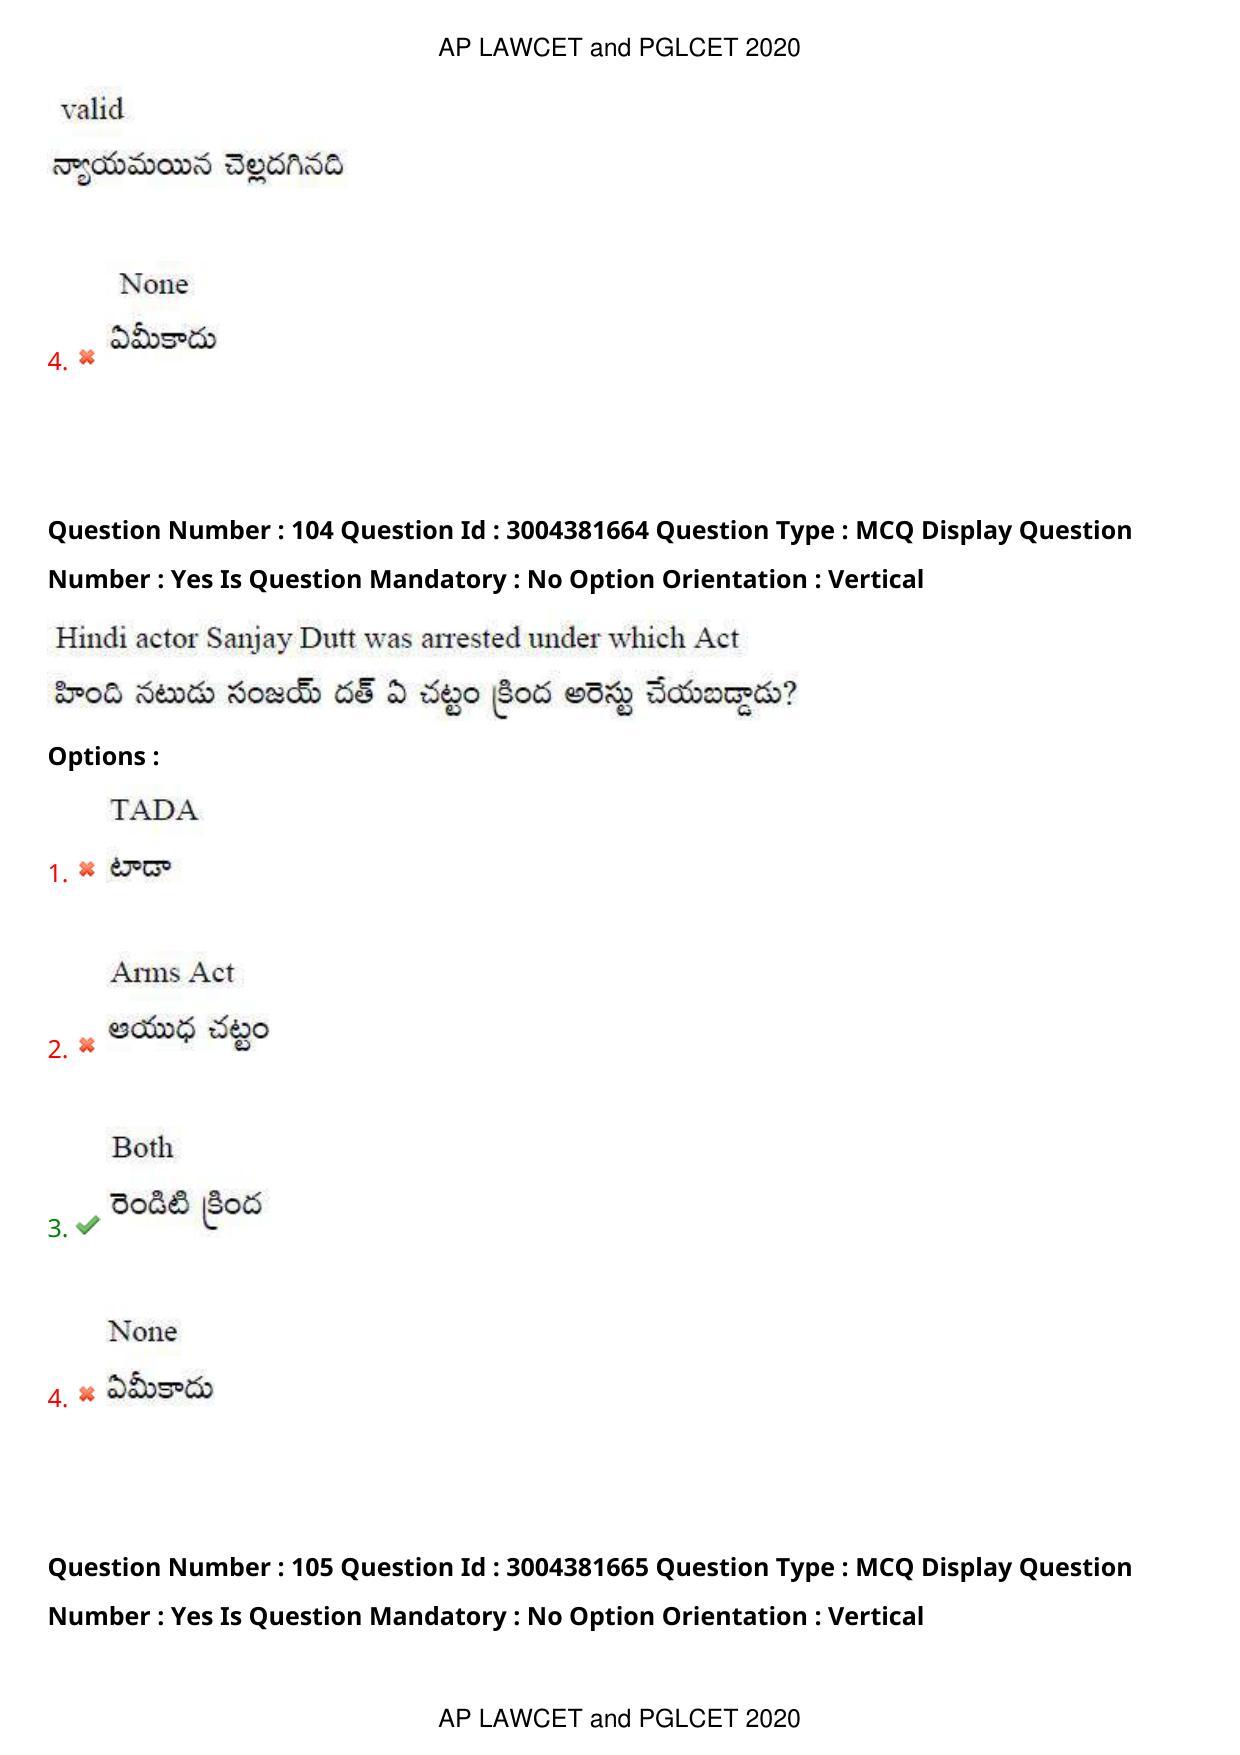 AP LAWCET 2020 - 5 Year LLB Question Paper With Keys - Page 68